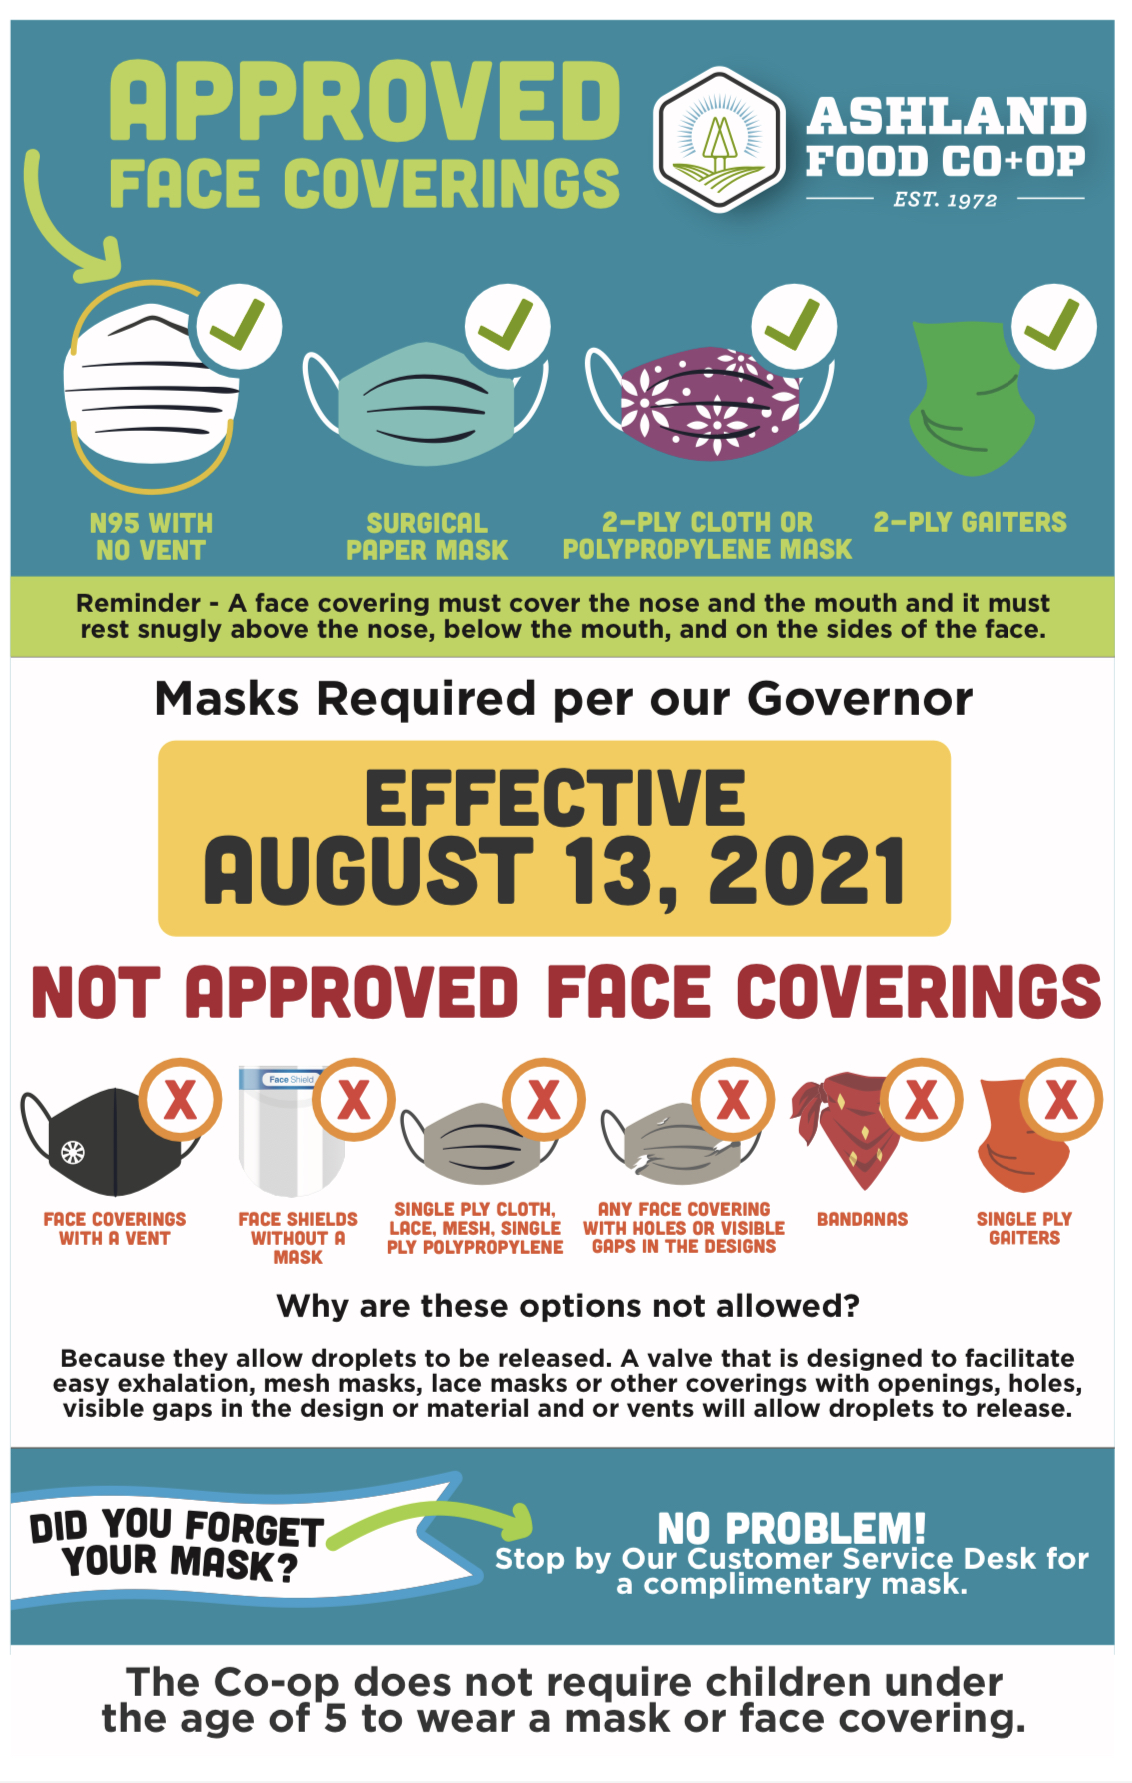 Acceptable Mask Use Policy as of Friday, August 13th, 2021 from the Ashland Food Co-op.